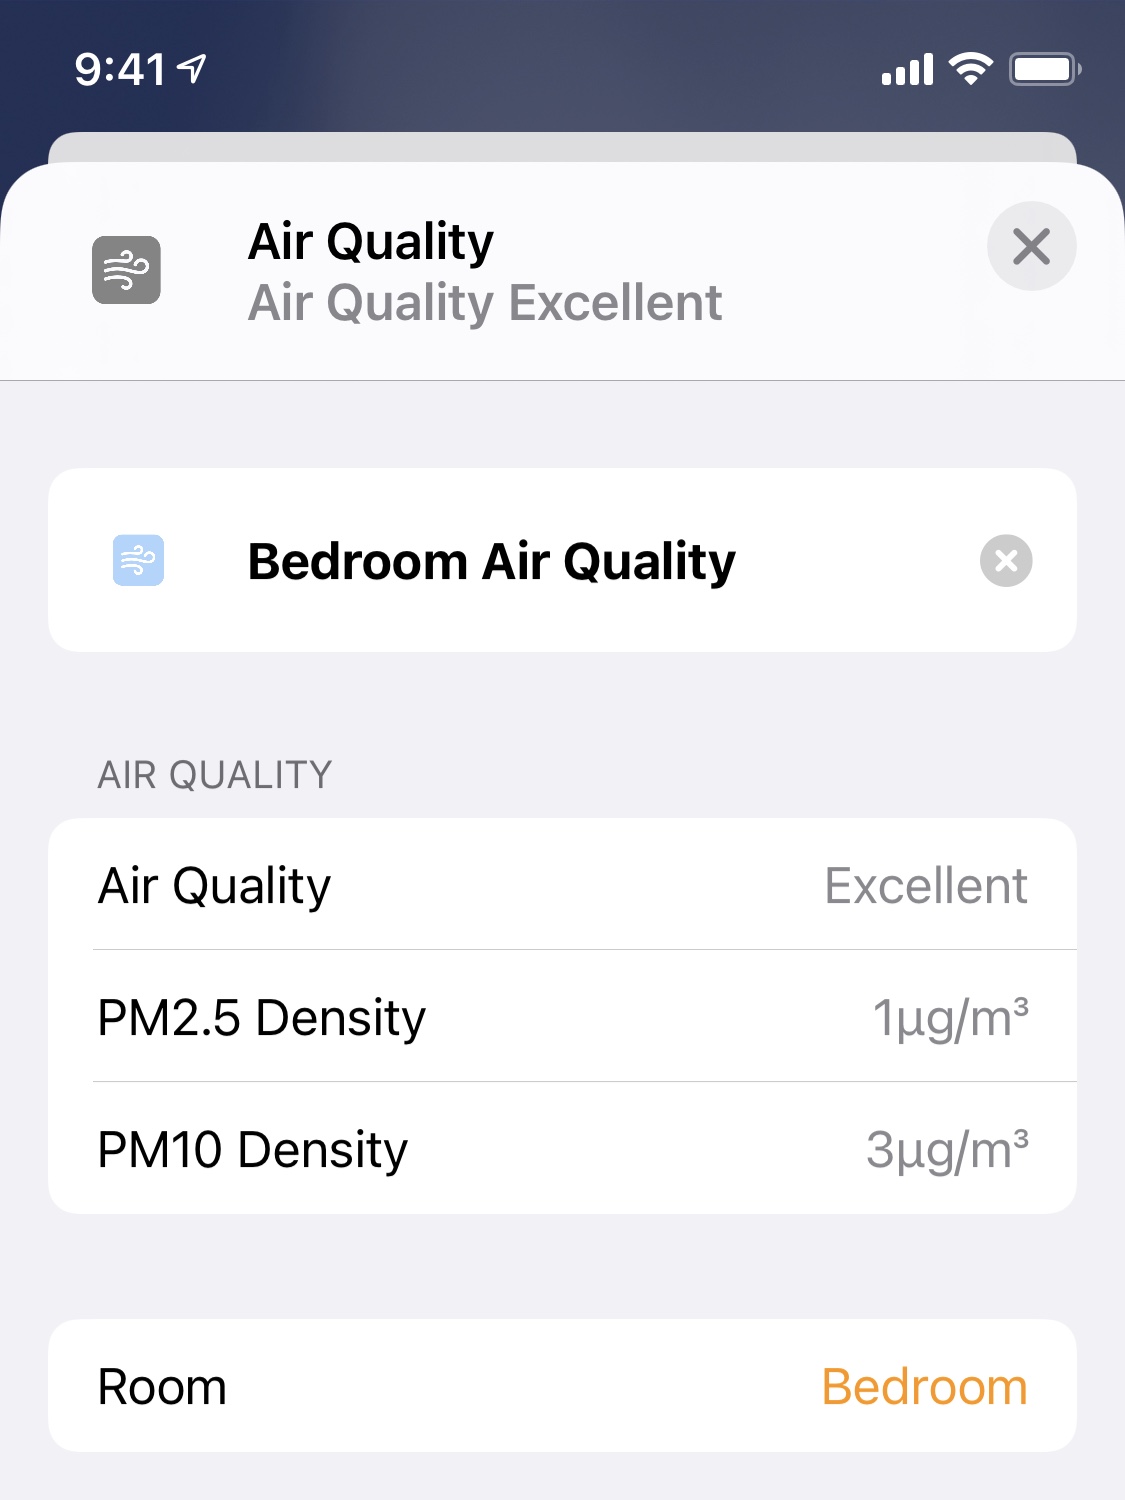 Air Quality Tile with PM 2.5 and PM 10 Densities